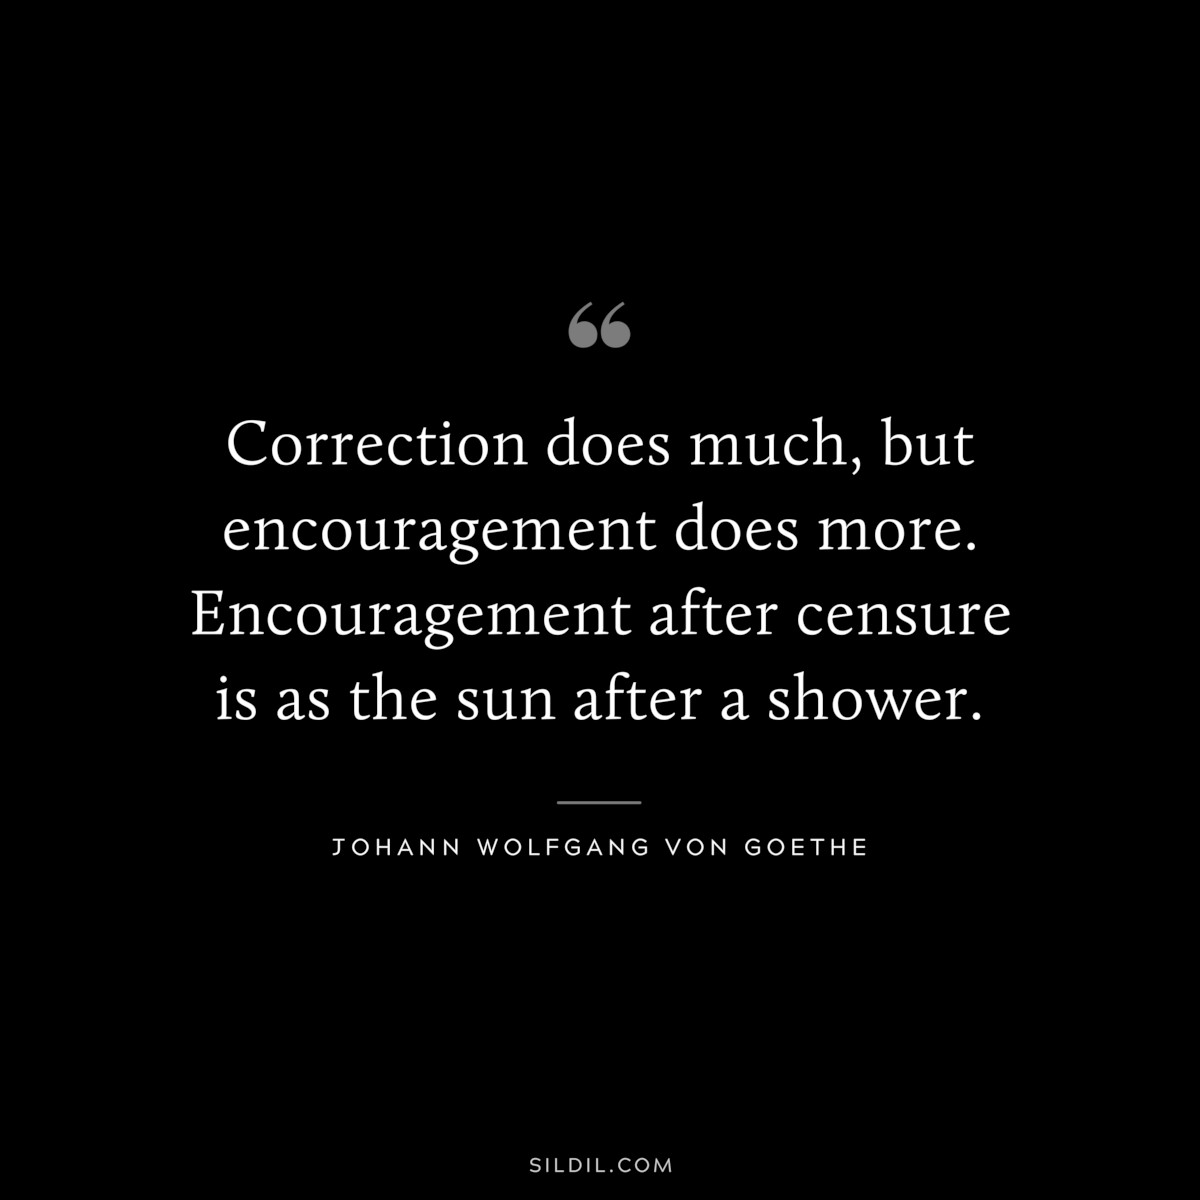 Correction does much, but encouragement does more. Encouragement after censure is as the sun after a shower.― Johann Wolfgang von Goethe